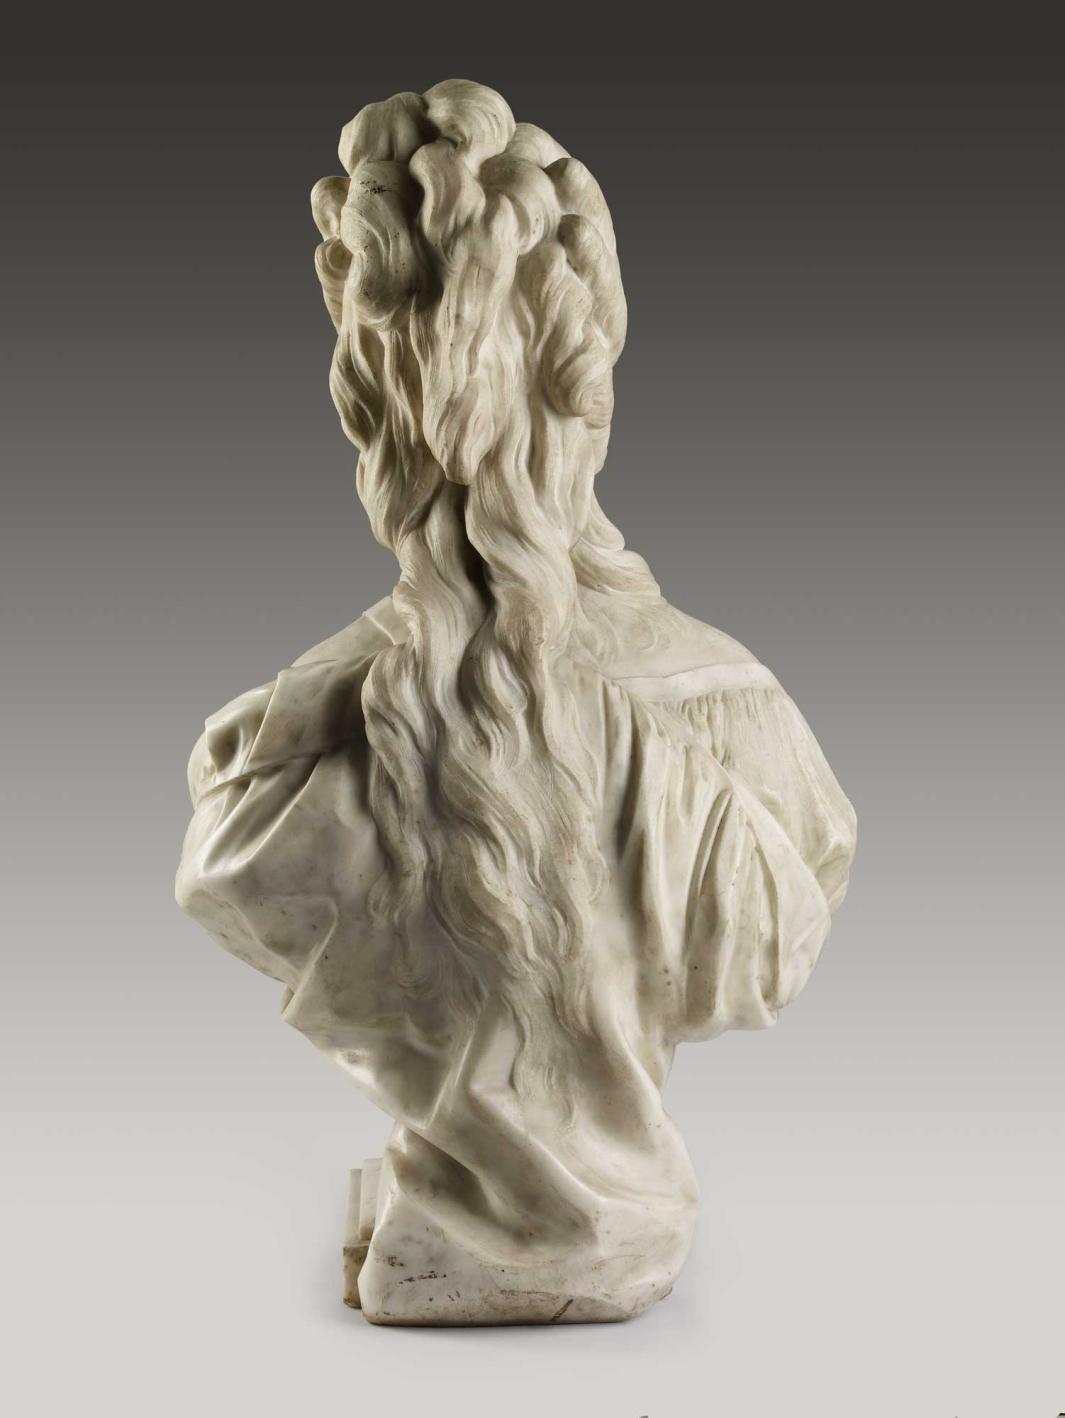 Alternate view of a marble bust of a woman draped in a garment with long, curly hair.